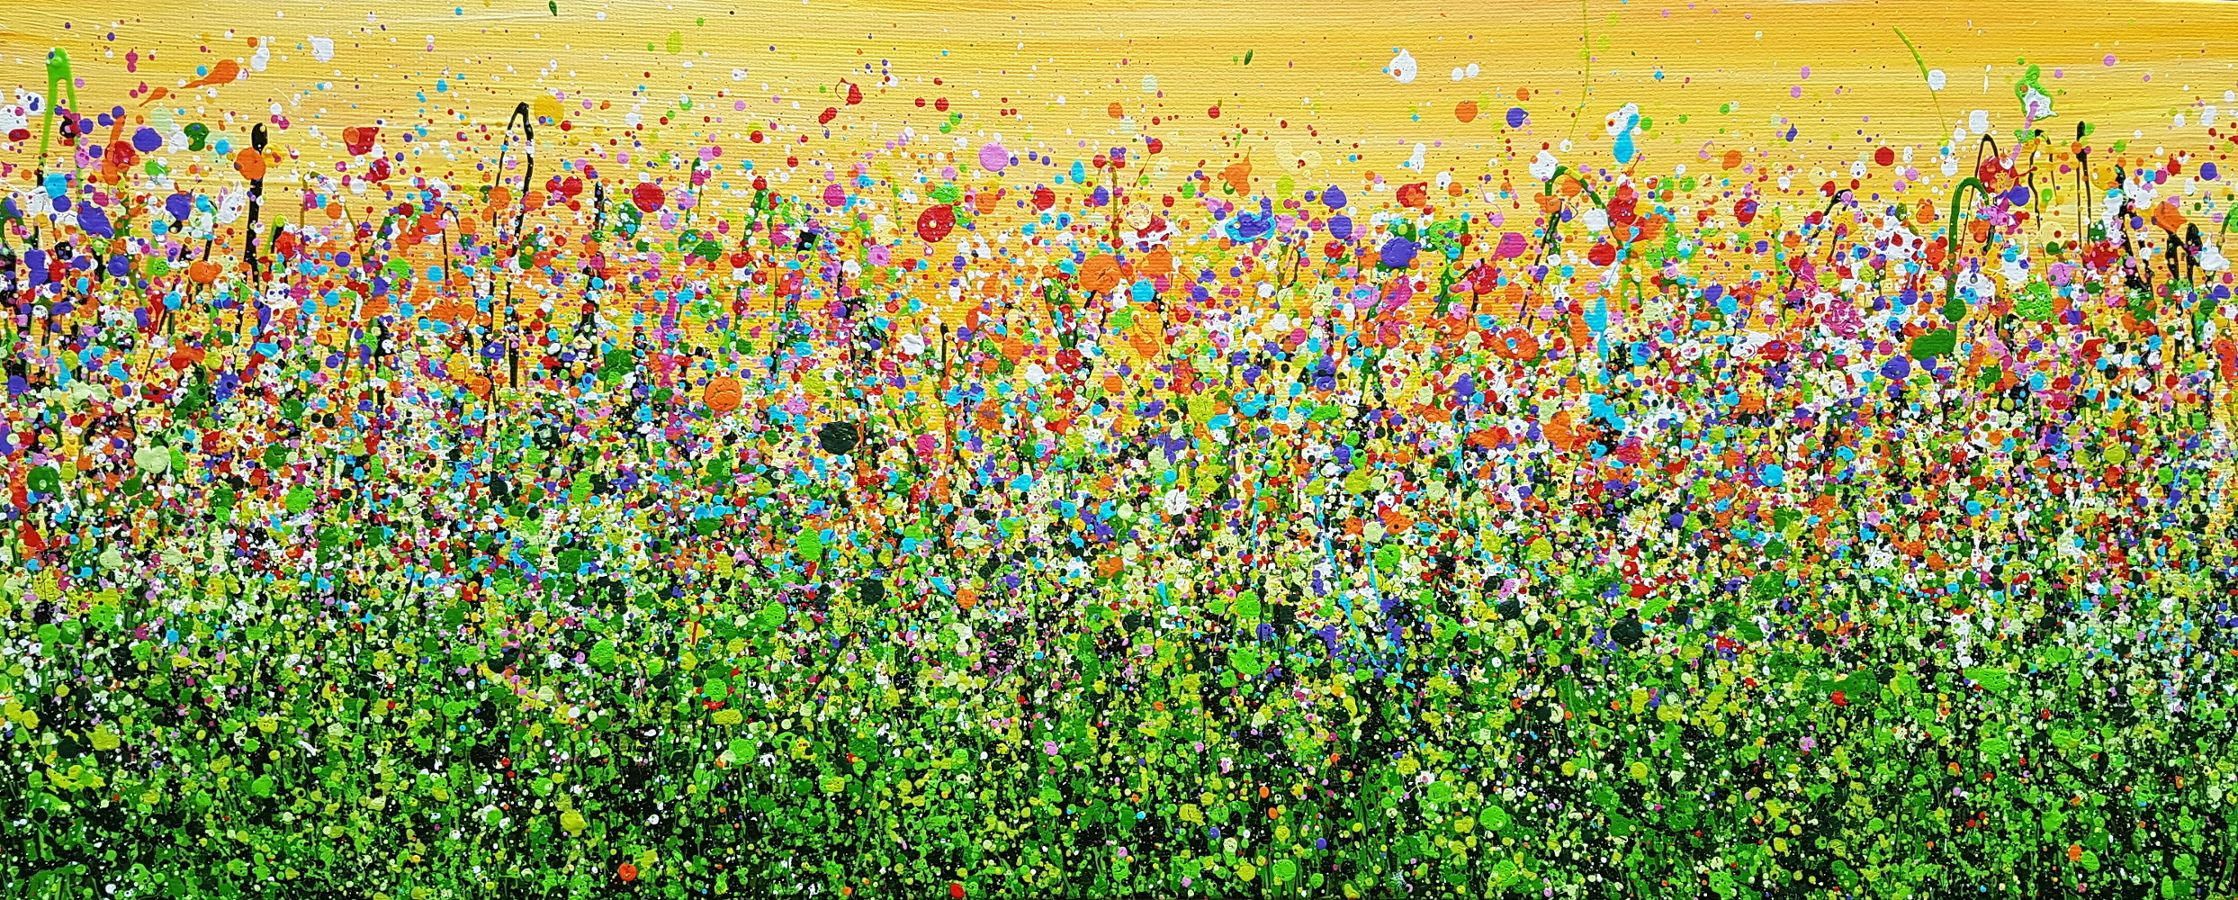 Daybreak Meadows, by Lucy Moore